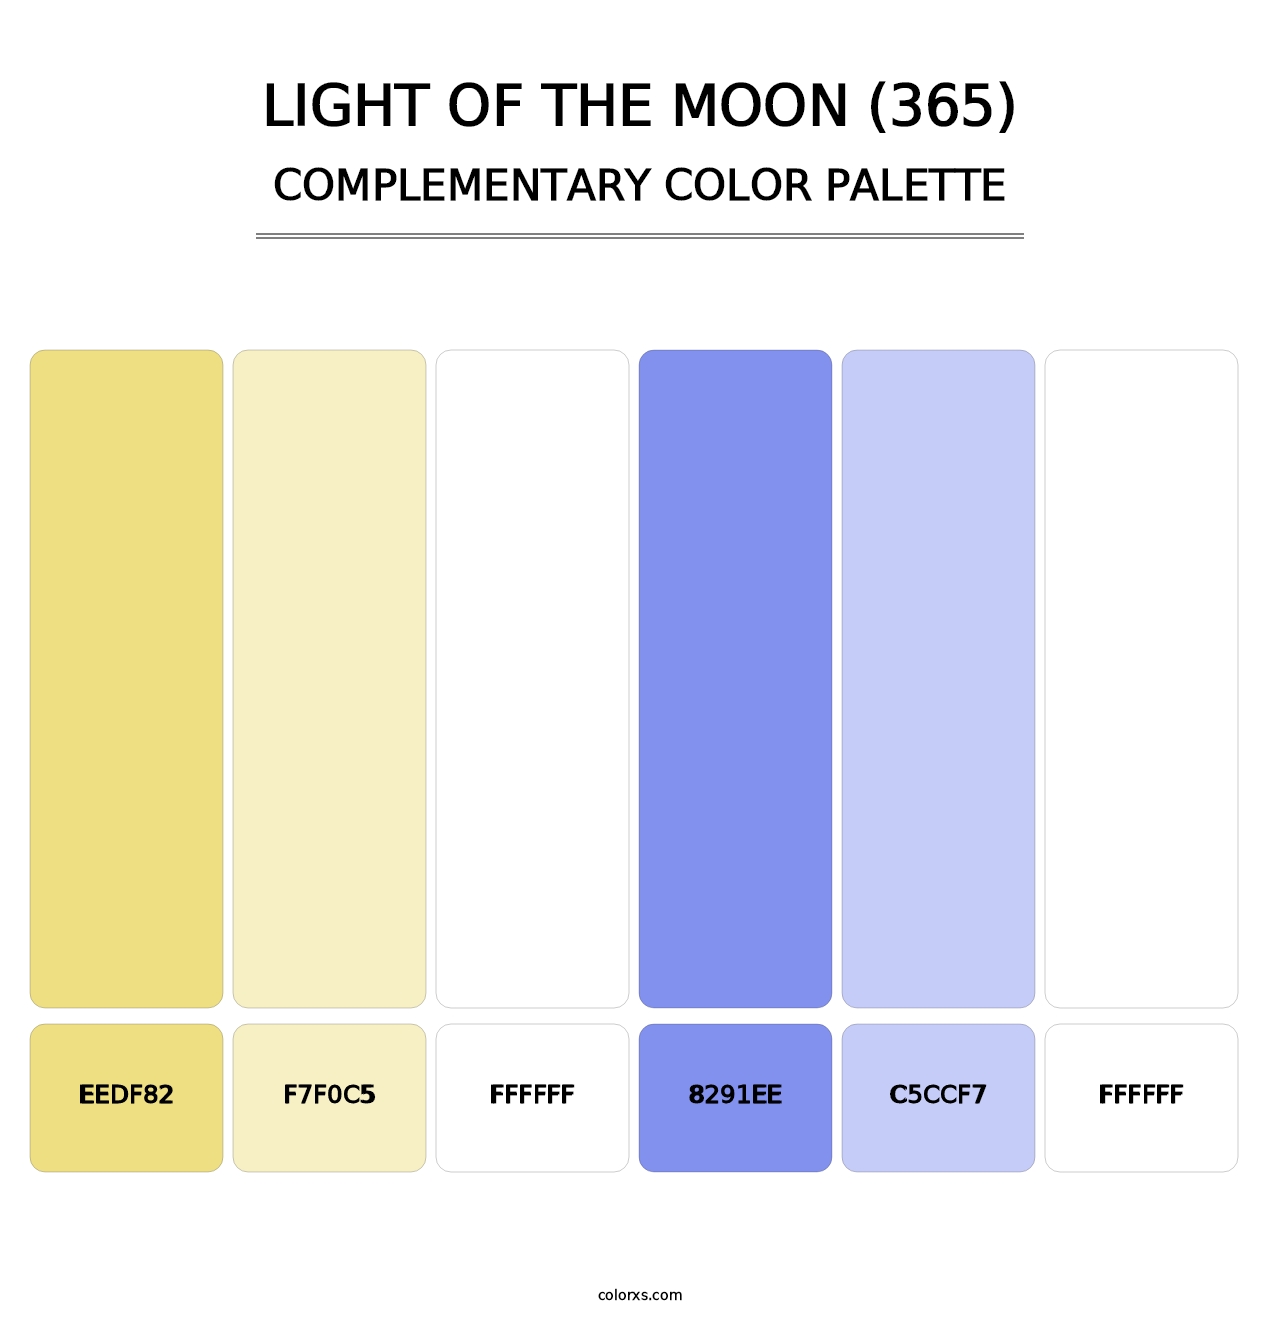 Light of the Moon (365) - Complementary Color Palette